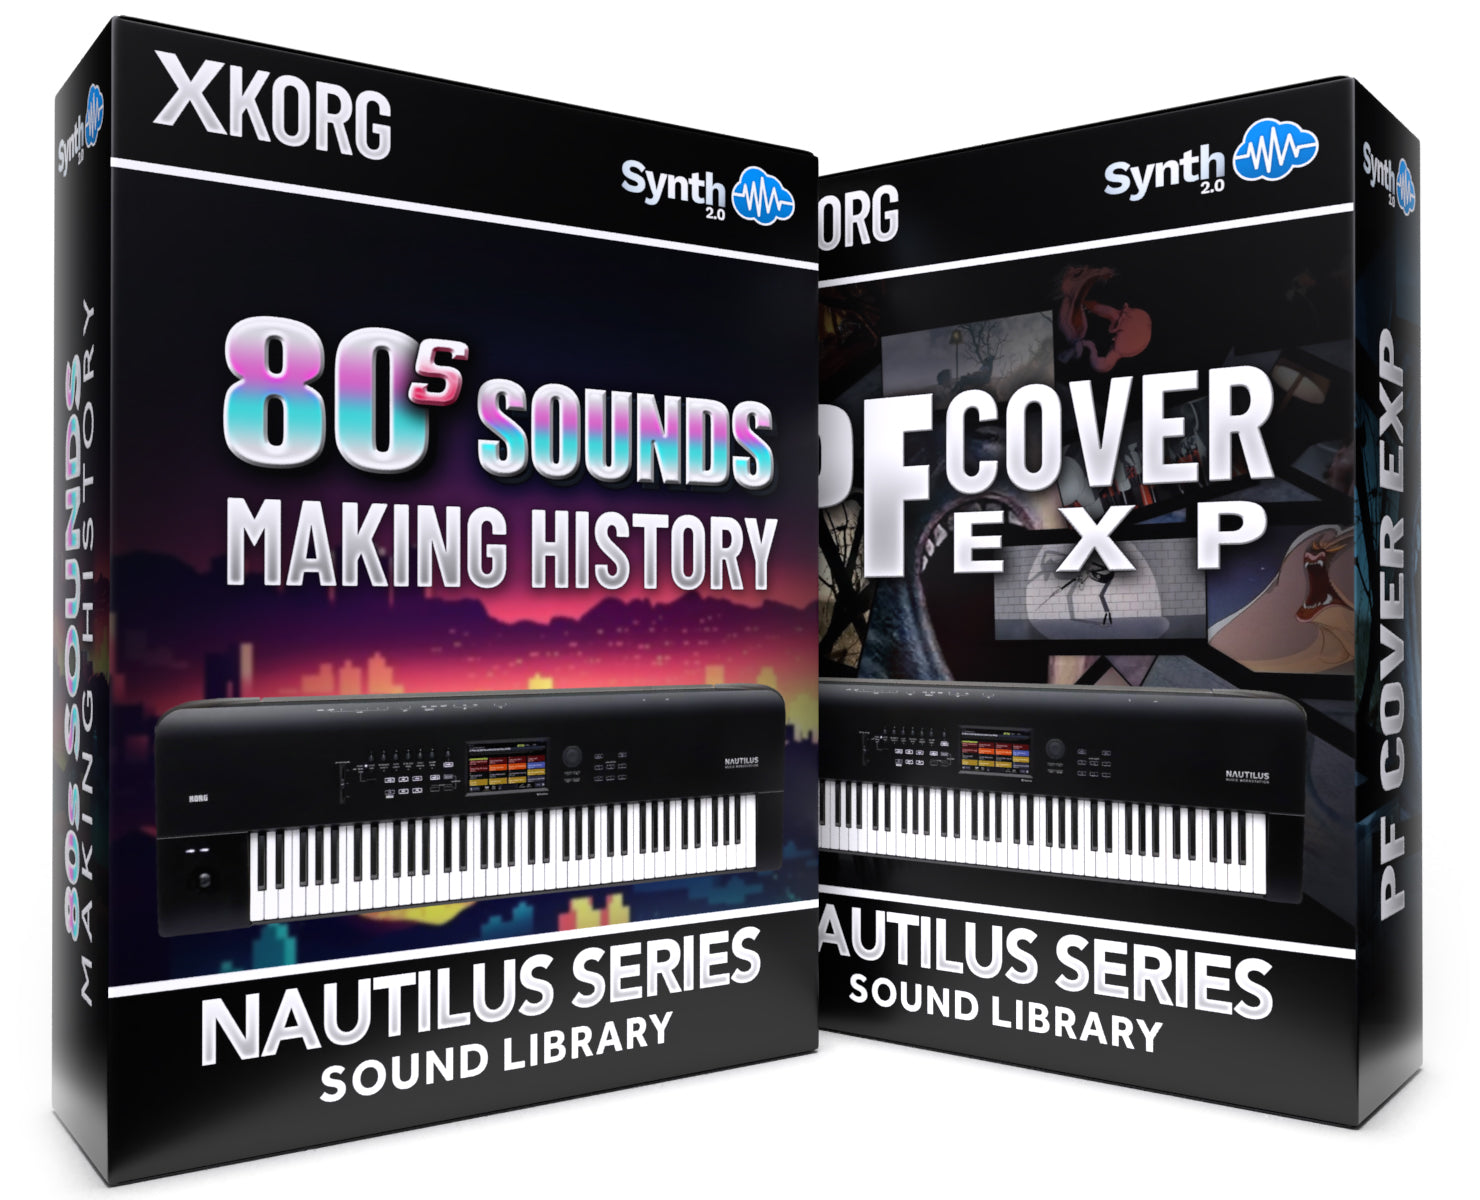 FPL019 - ( Bundle ) - 80s Sounds - Making History + PF Cover EXP - Korg Nautilus Series